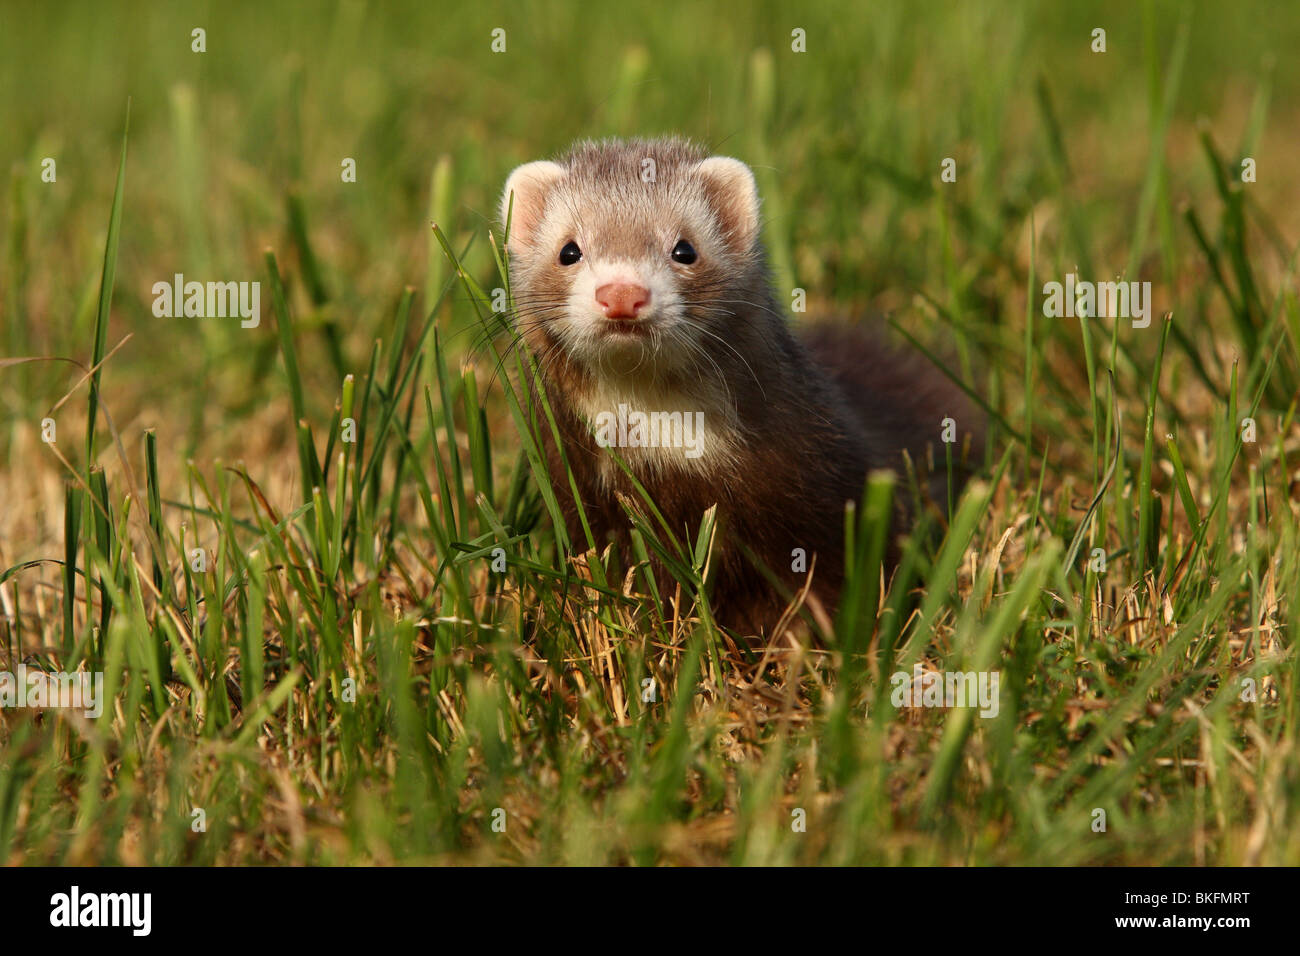 Vector of a cute brown ferret munching on a chocolate chip cookie